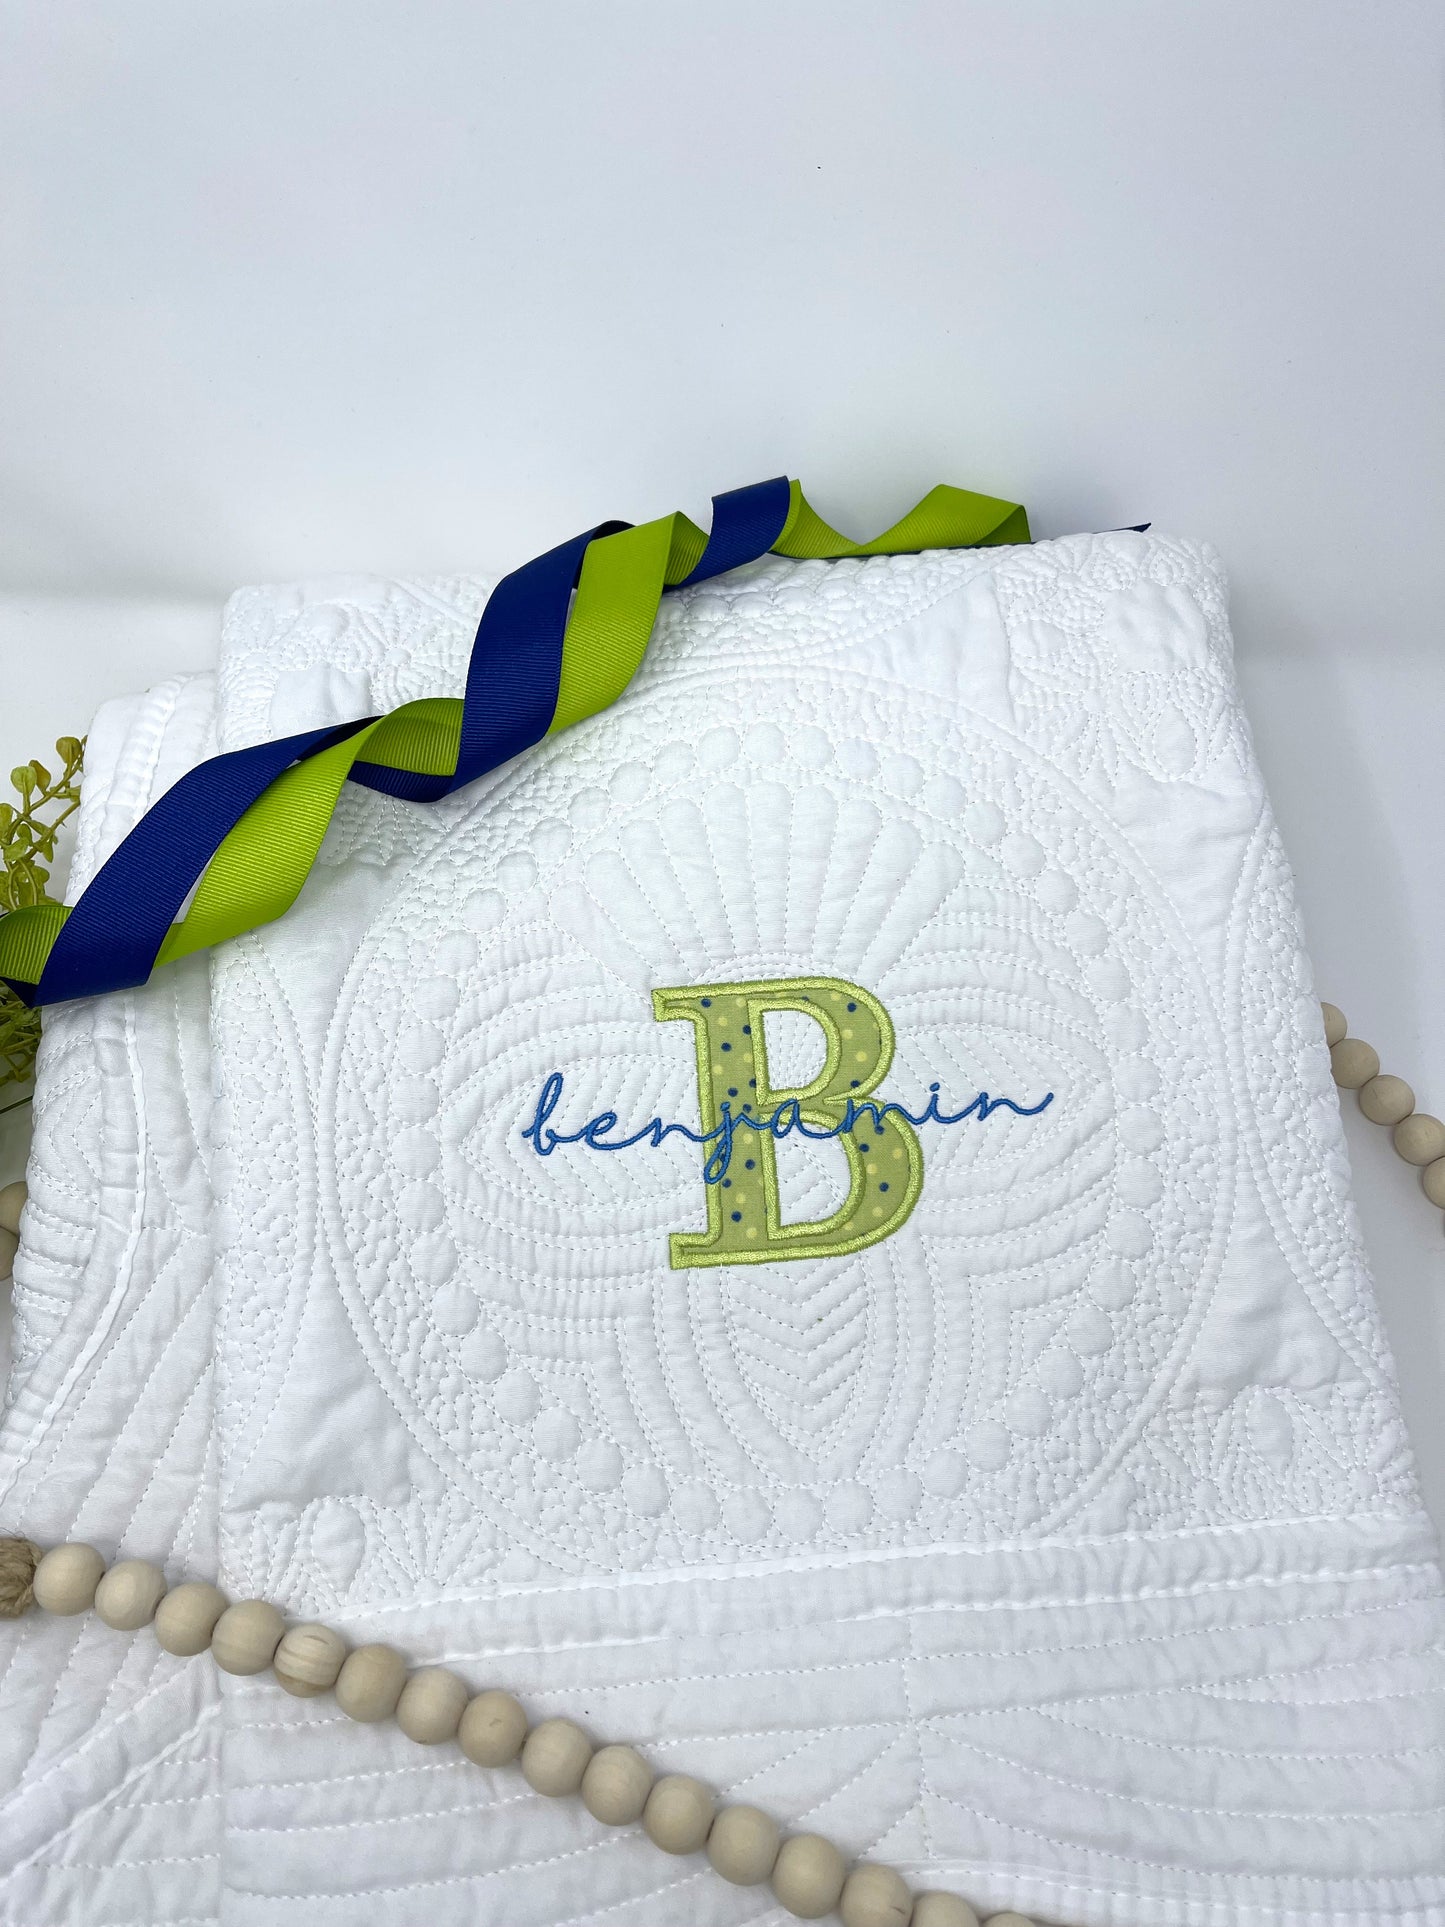 Embroidered Heirloom Baby Quilt with Applique Letter